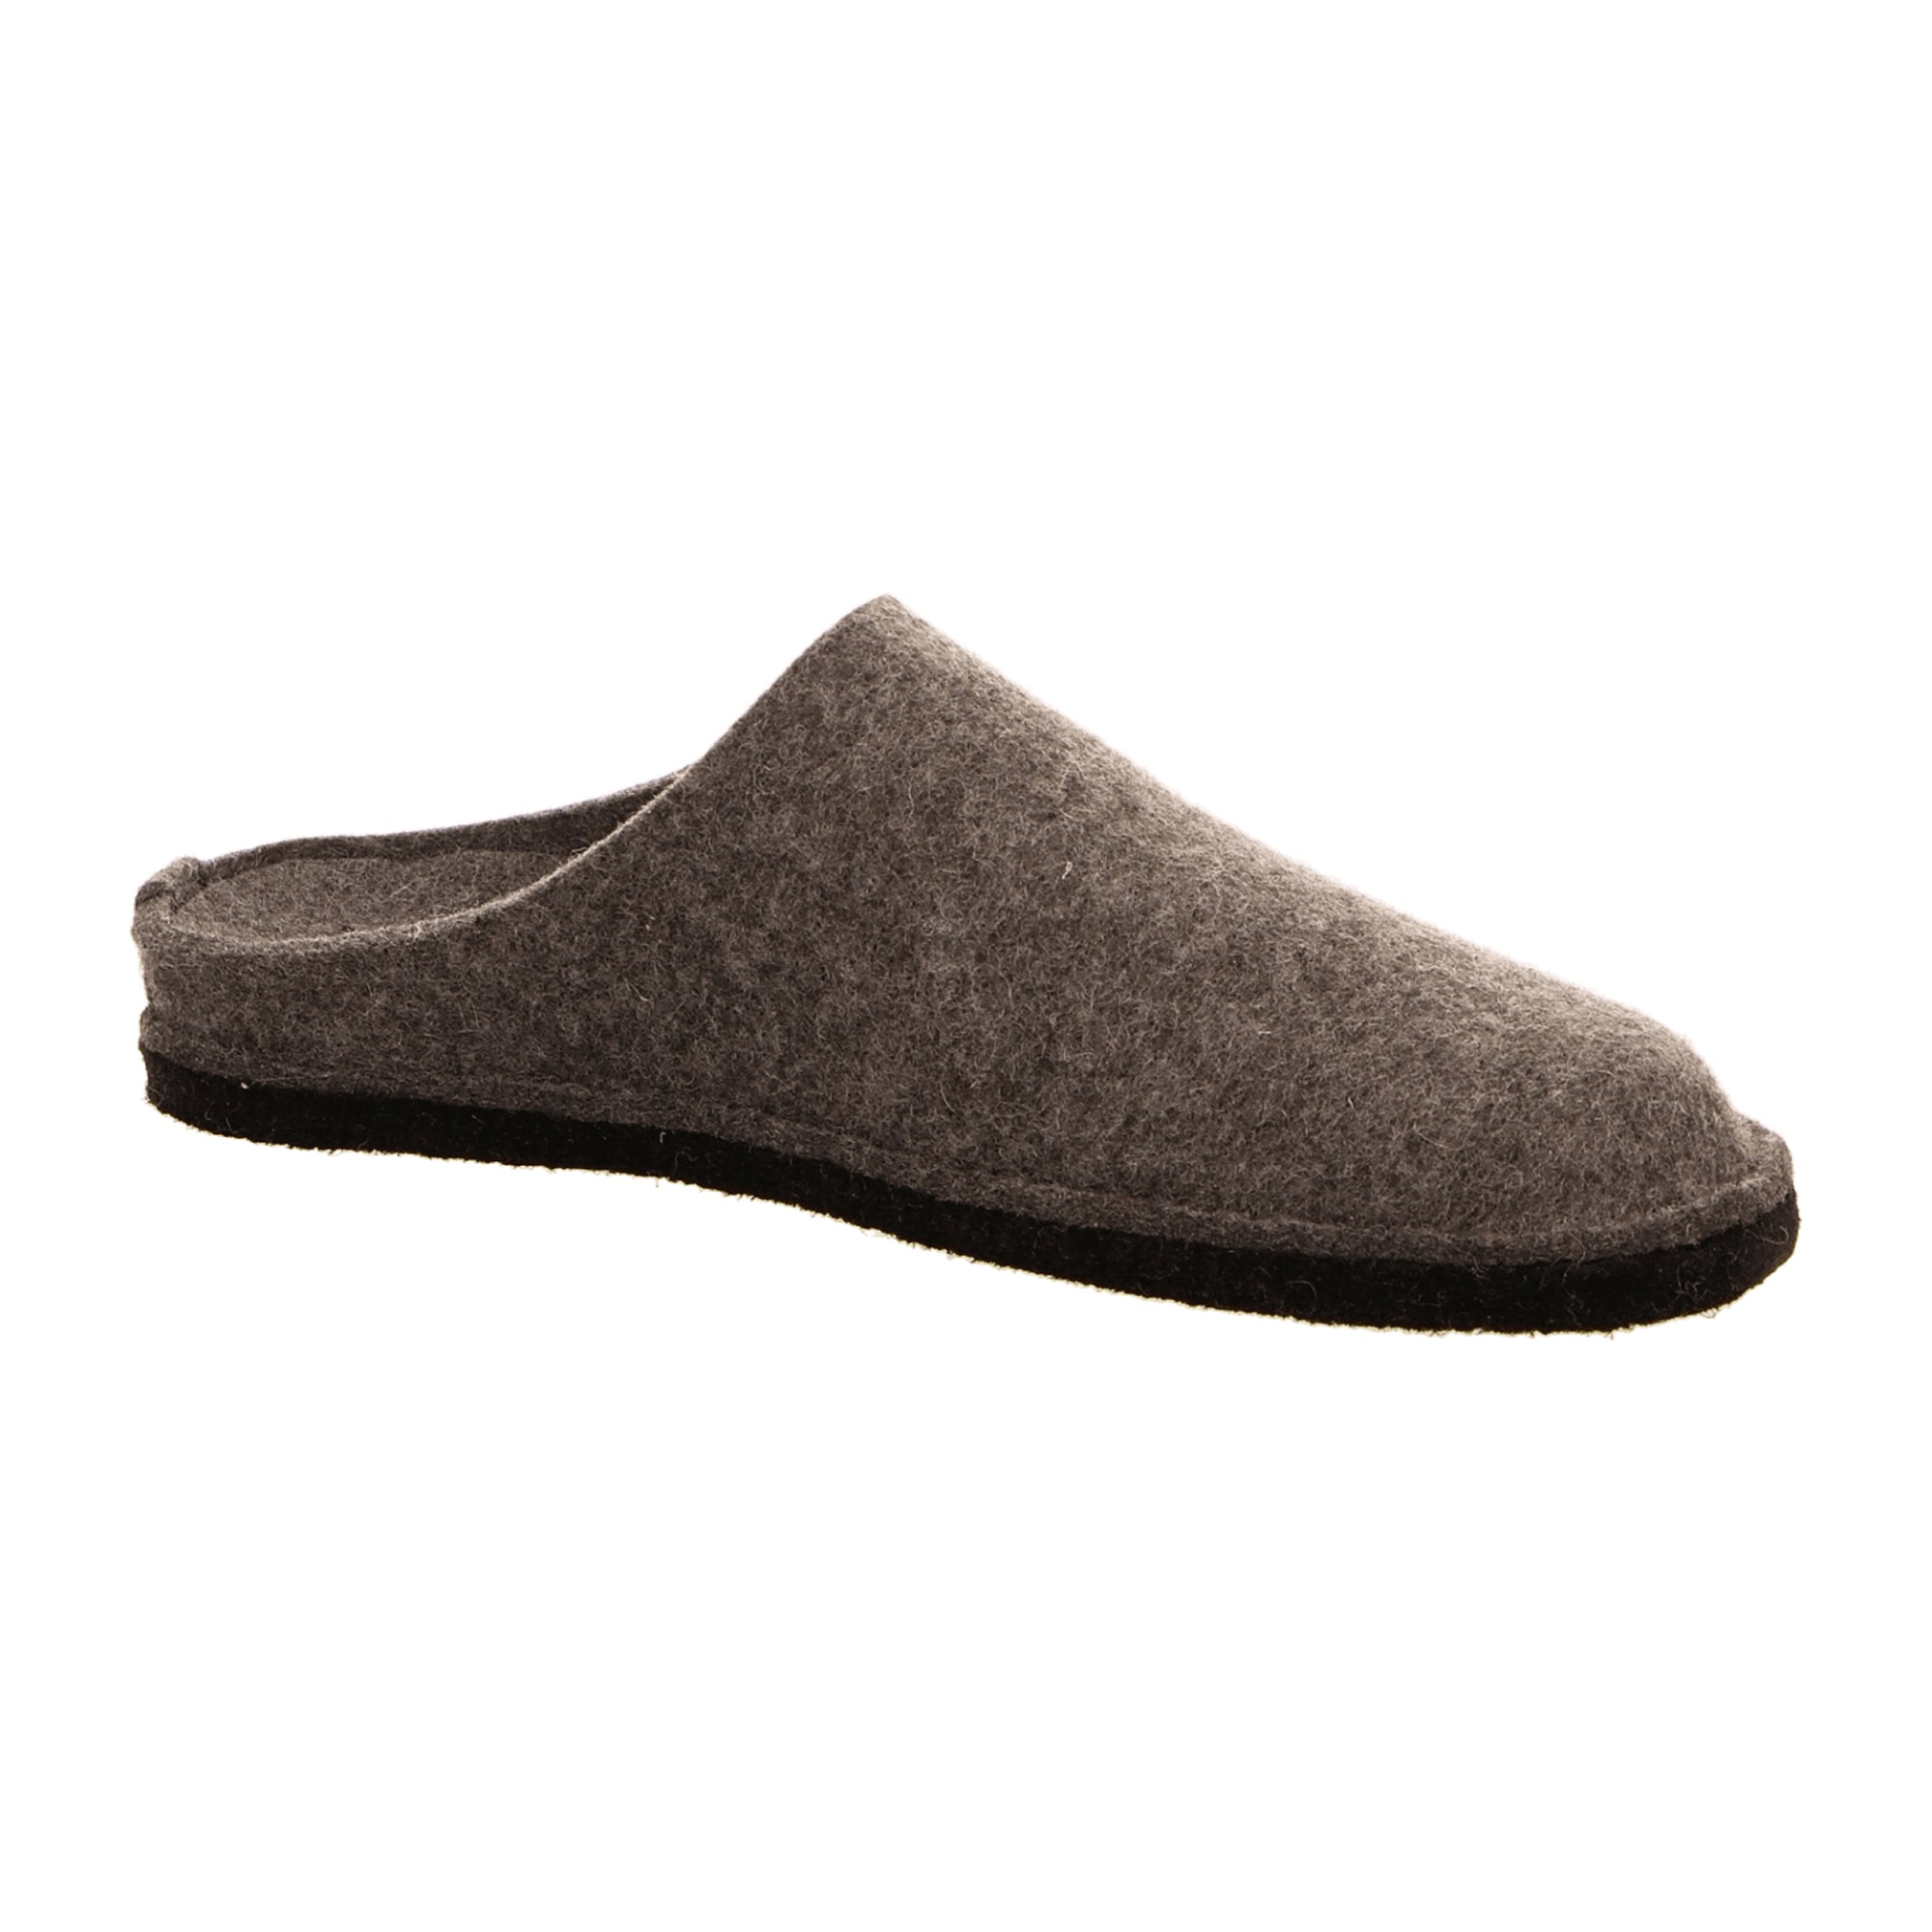 Haflinger Flair Soft Men's Slippers - Anthracite Gray | Stylish & Comfortable